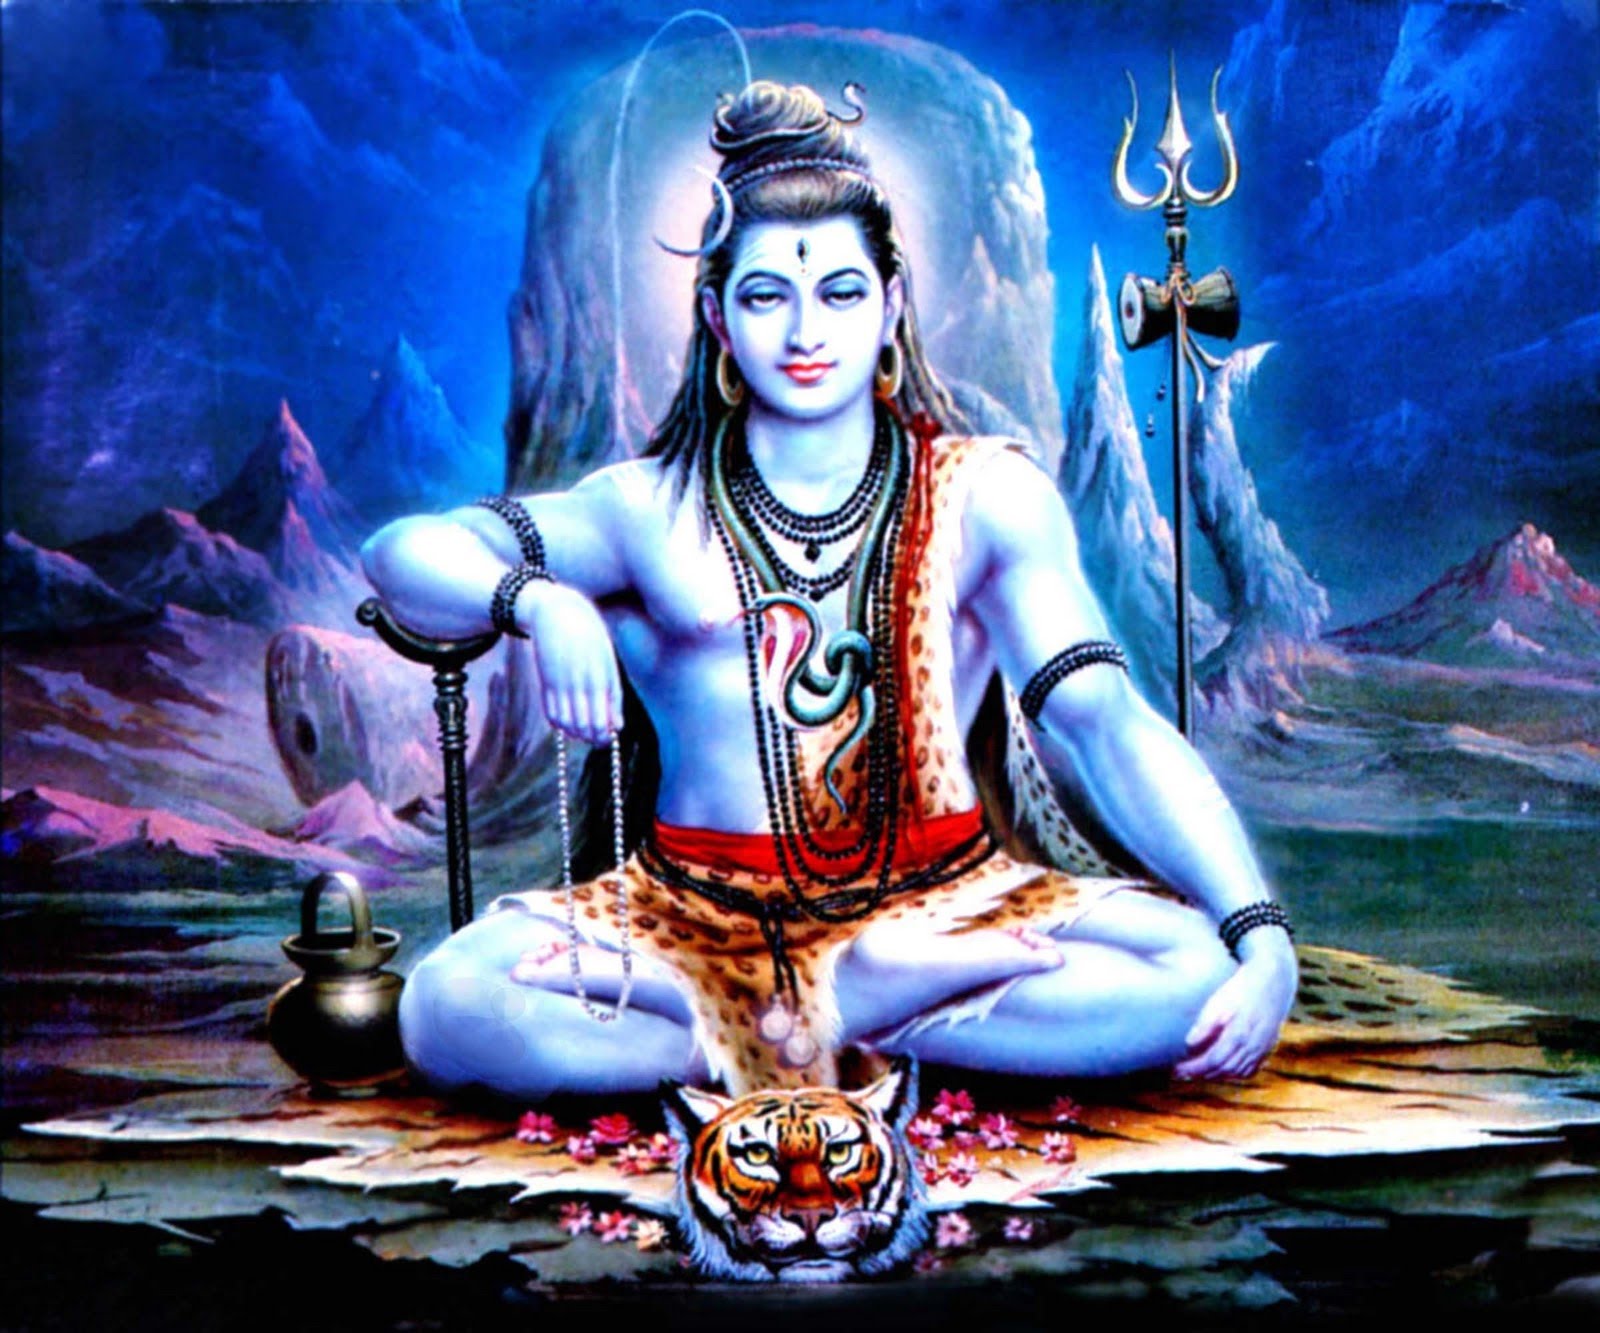 Festival of Mahashivratri & its Significance in Hinduism | INDIAN ETHOS